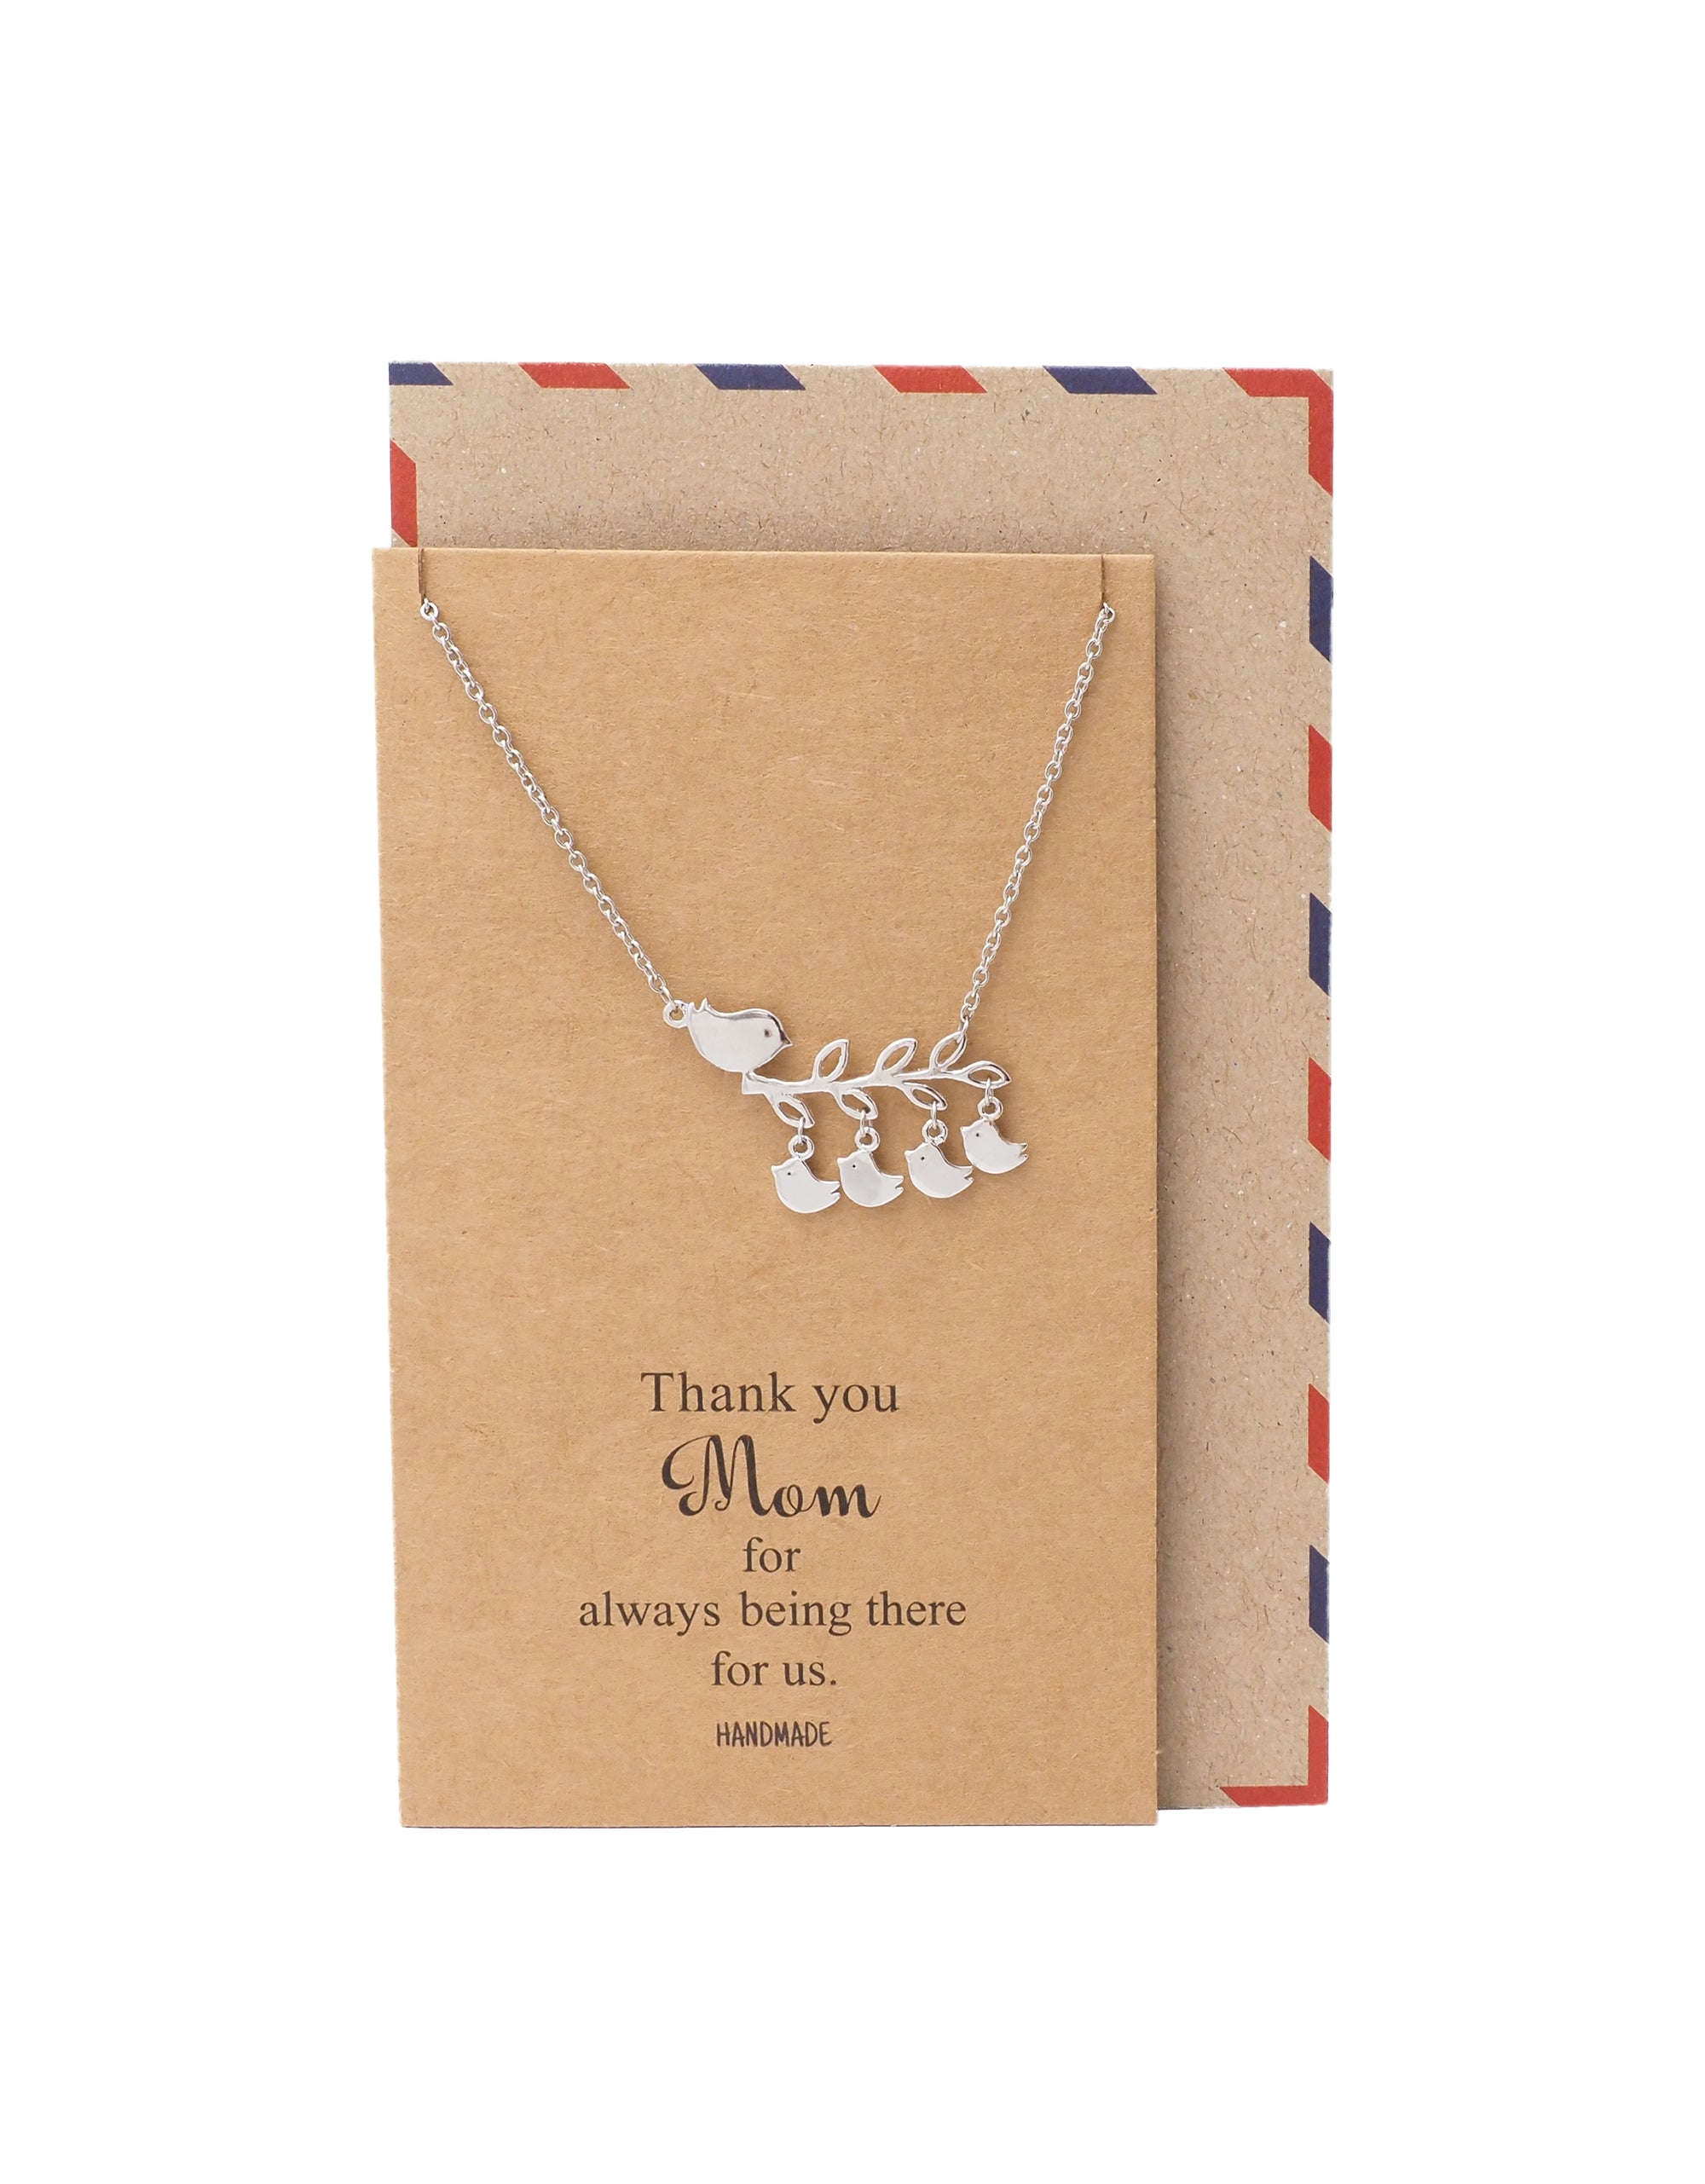 Angelique Mother and Daughter Necklace with Mom and Baby Birds Pendant, Gifts for Women, Silver Tone